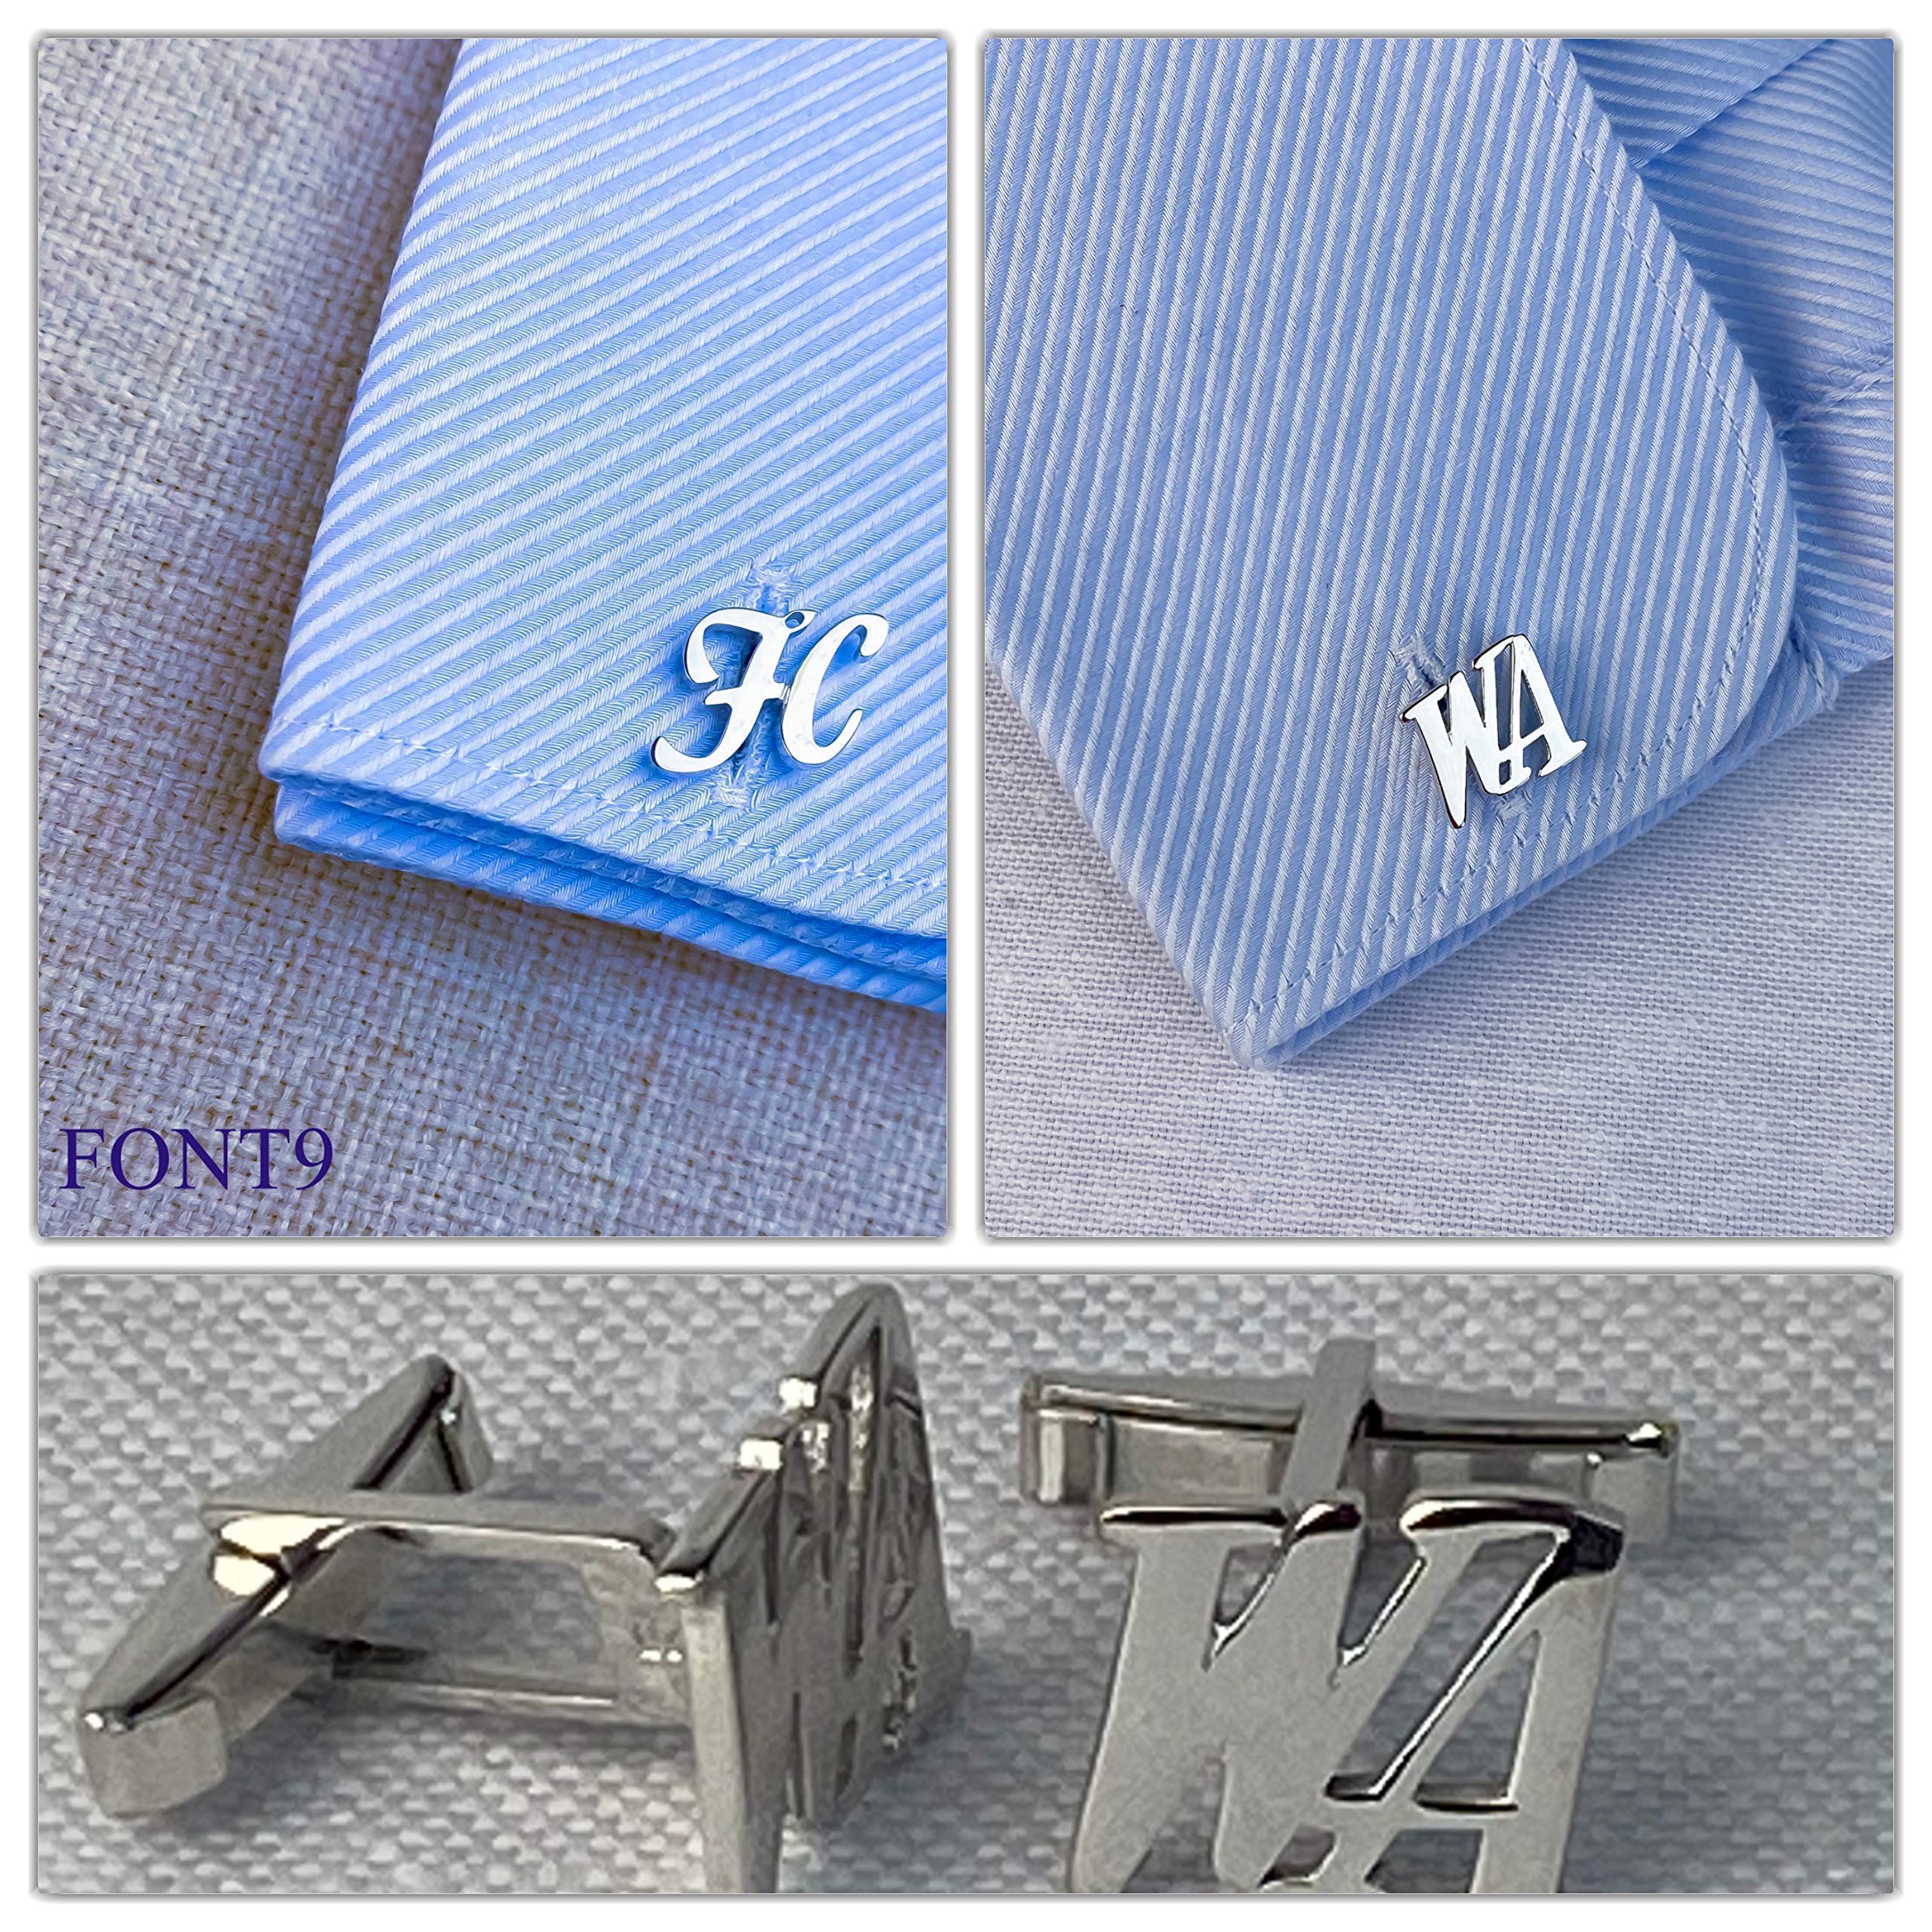 Personalized Name Cufflinks, Customize it with Your Letter, Initials Sterling Silver or 14k Yellow Gold Plated Cufflinks, Mens Gift, Gift for Dad, 3-5 DAYS DELIVERY WITH UPS